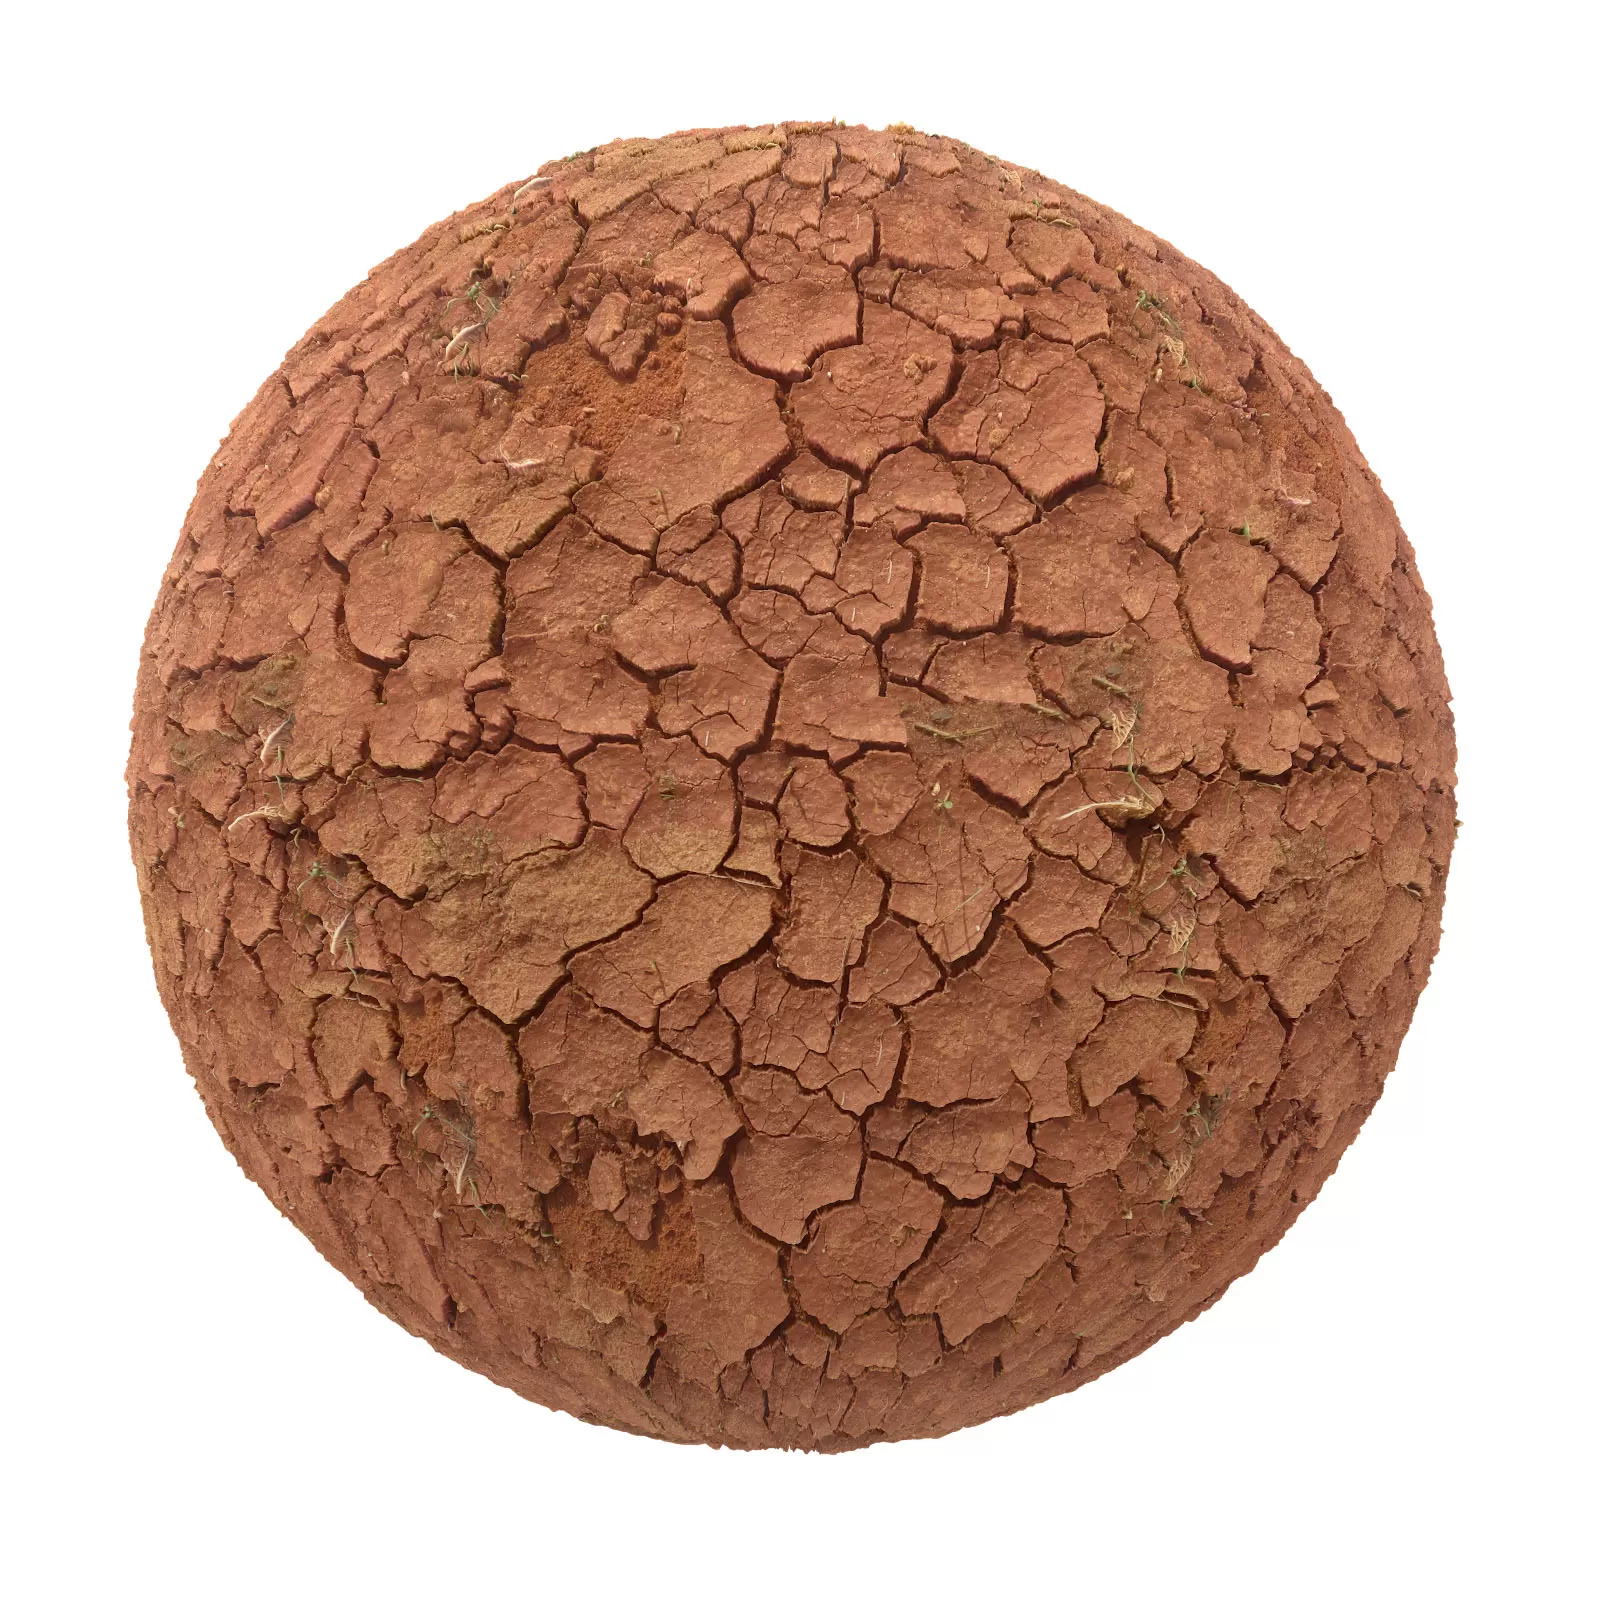 PBR CGAXIS TEXTURES – SOIL – Red Dry Cracked Dirt